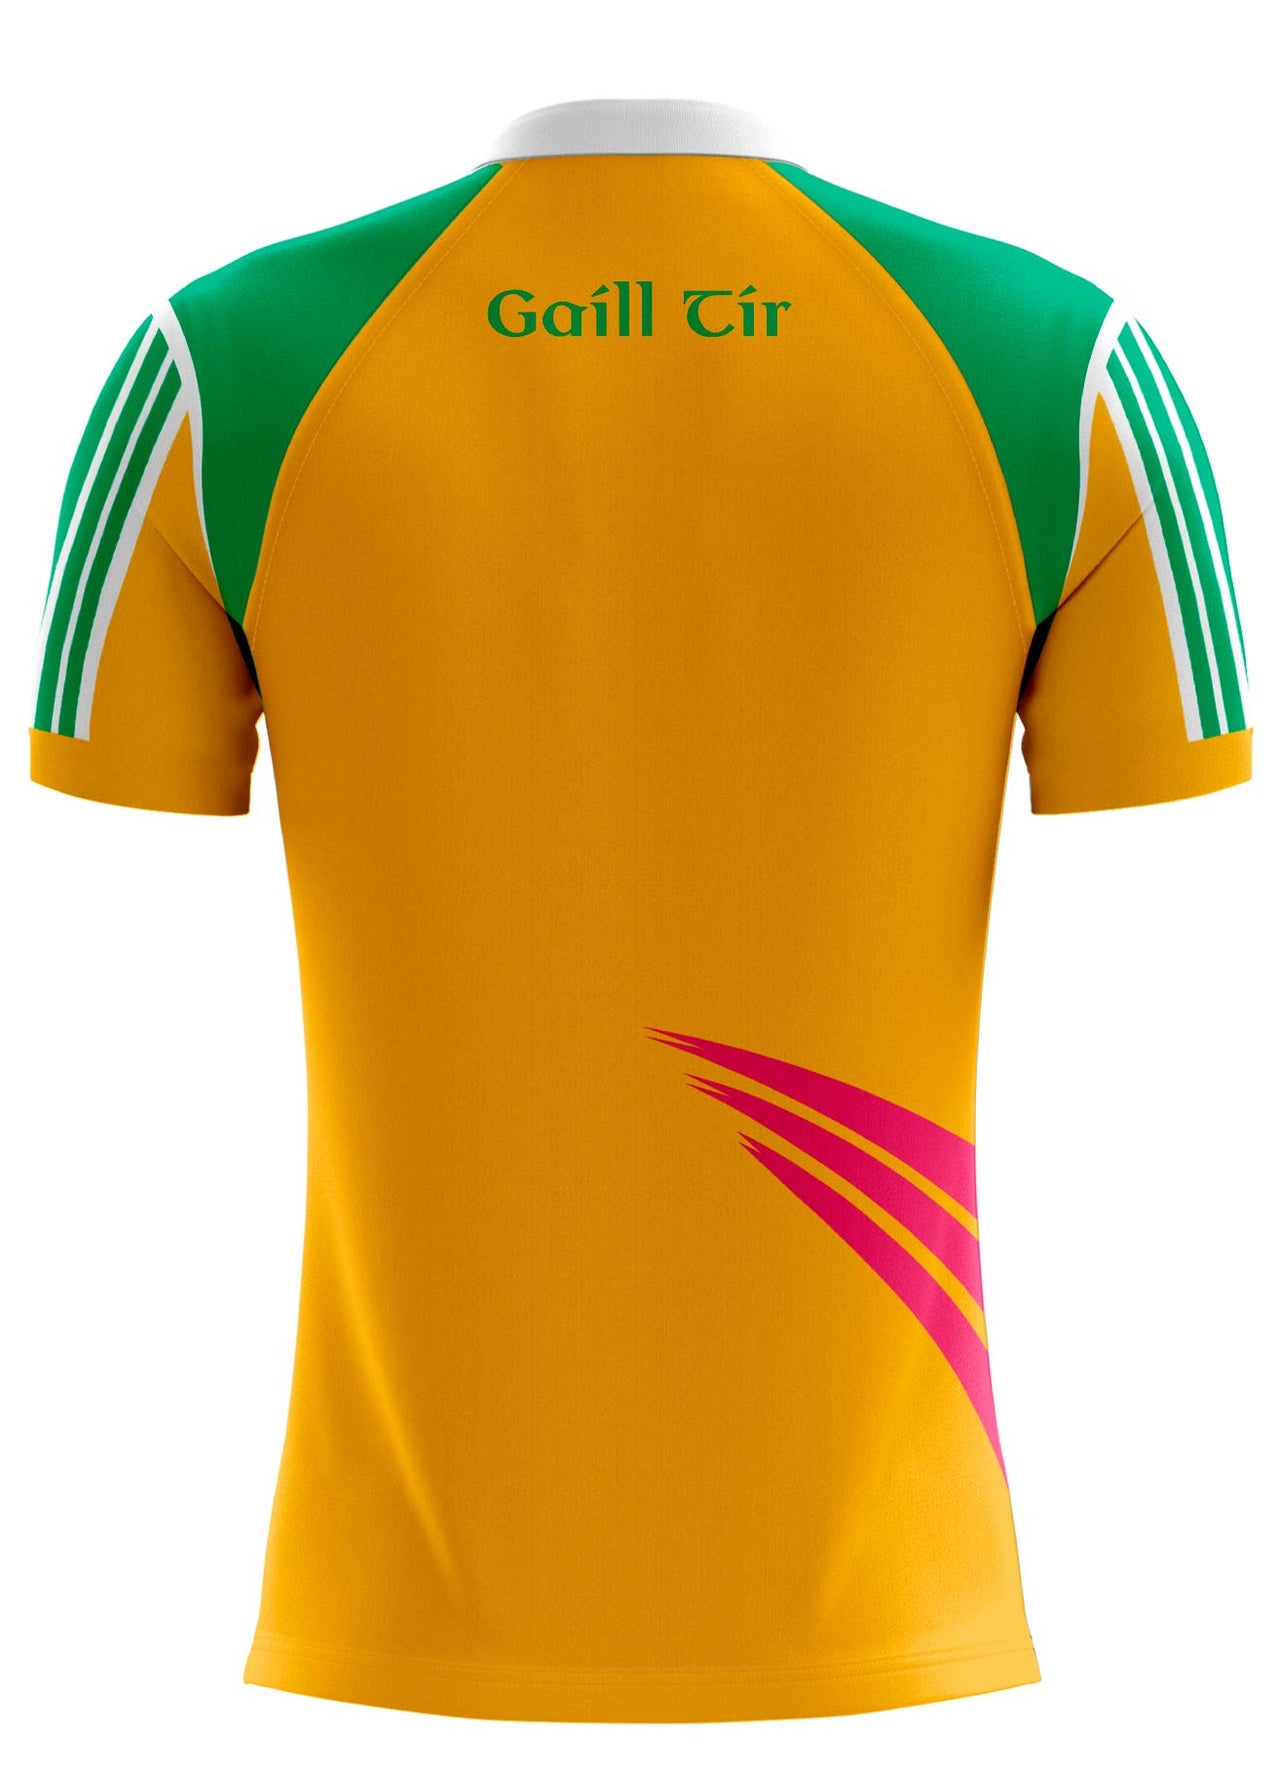 Gaultier LGFA Away Jersey Player Fit Adult